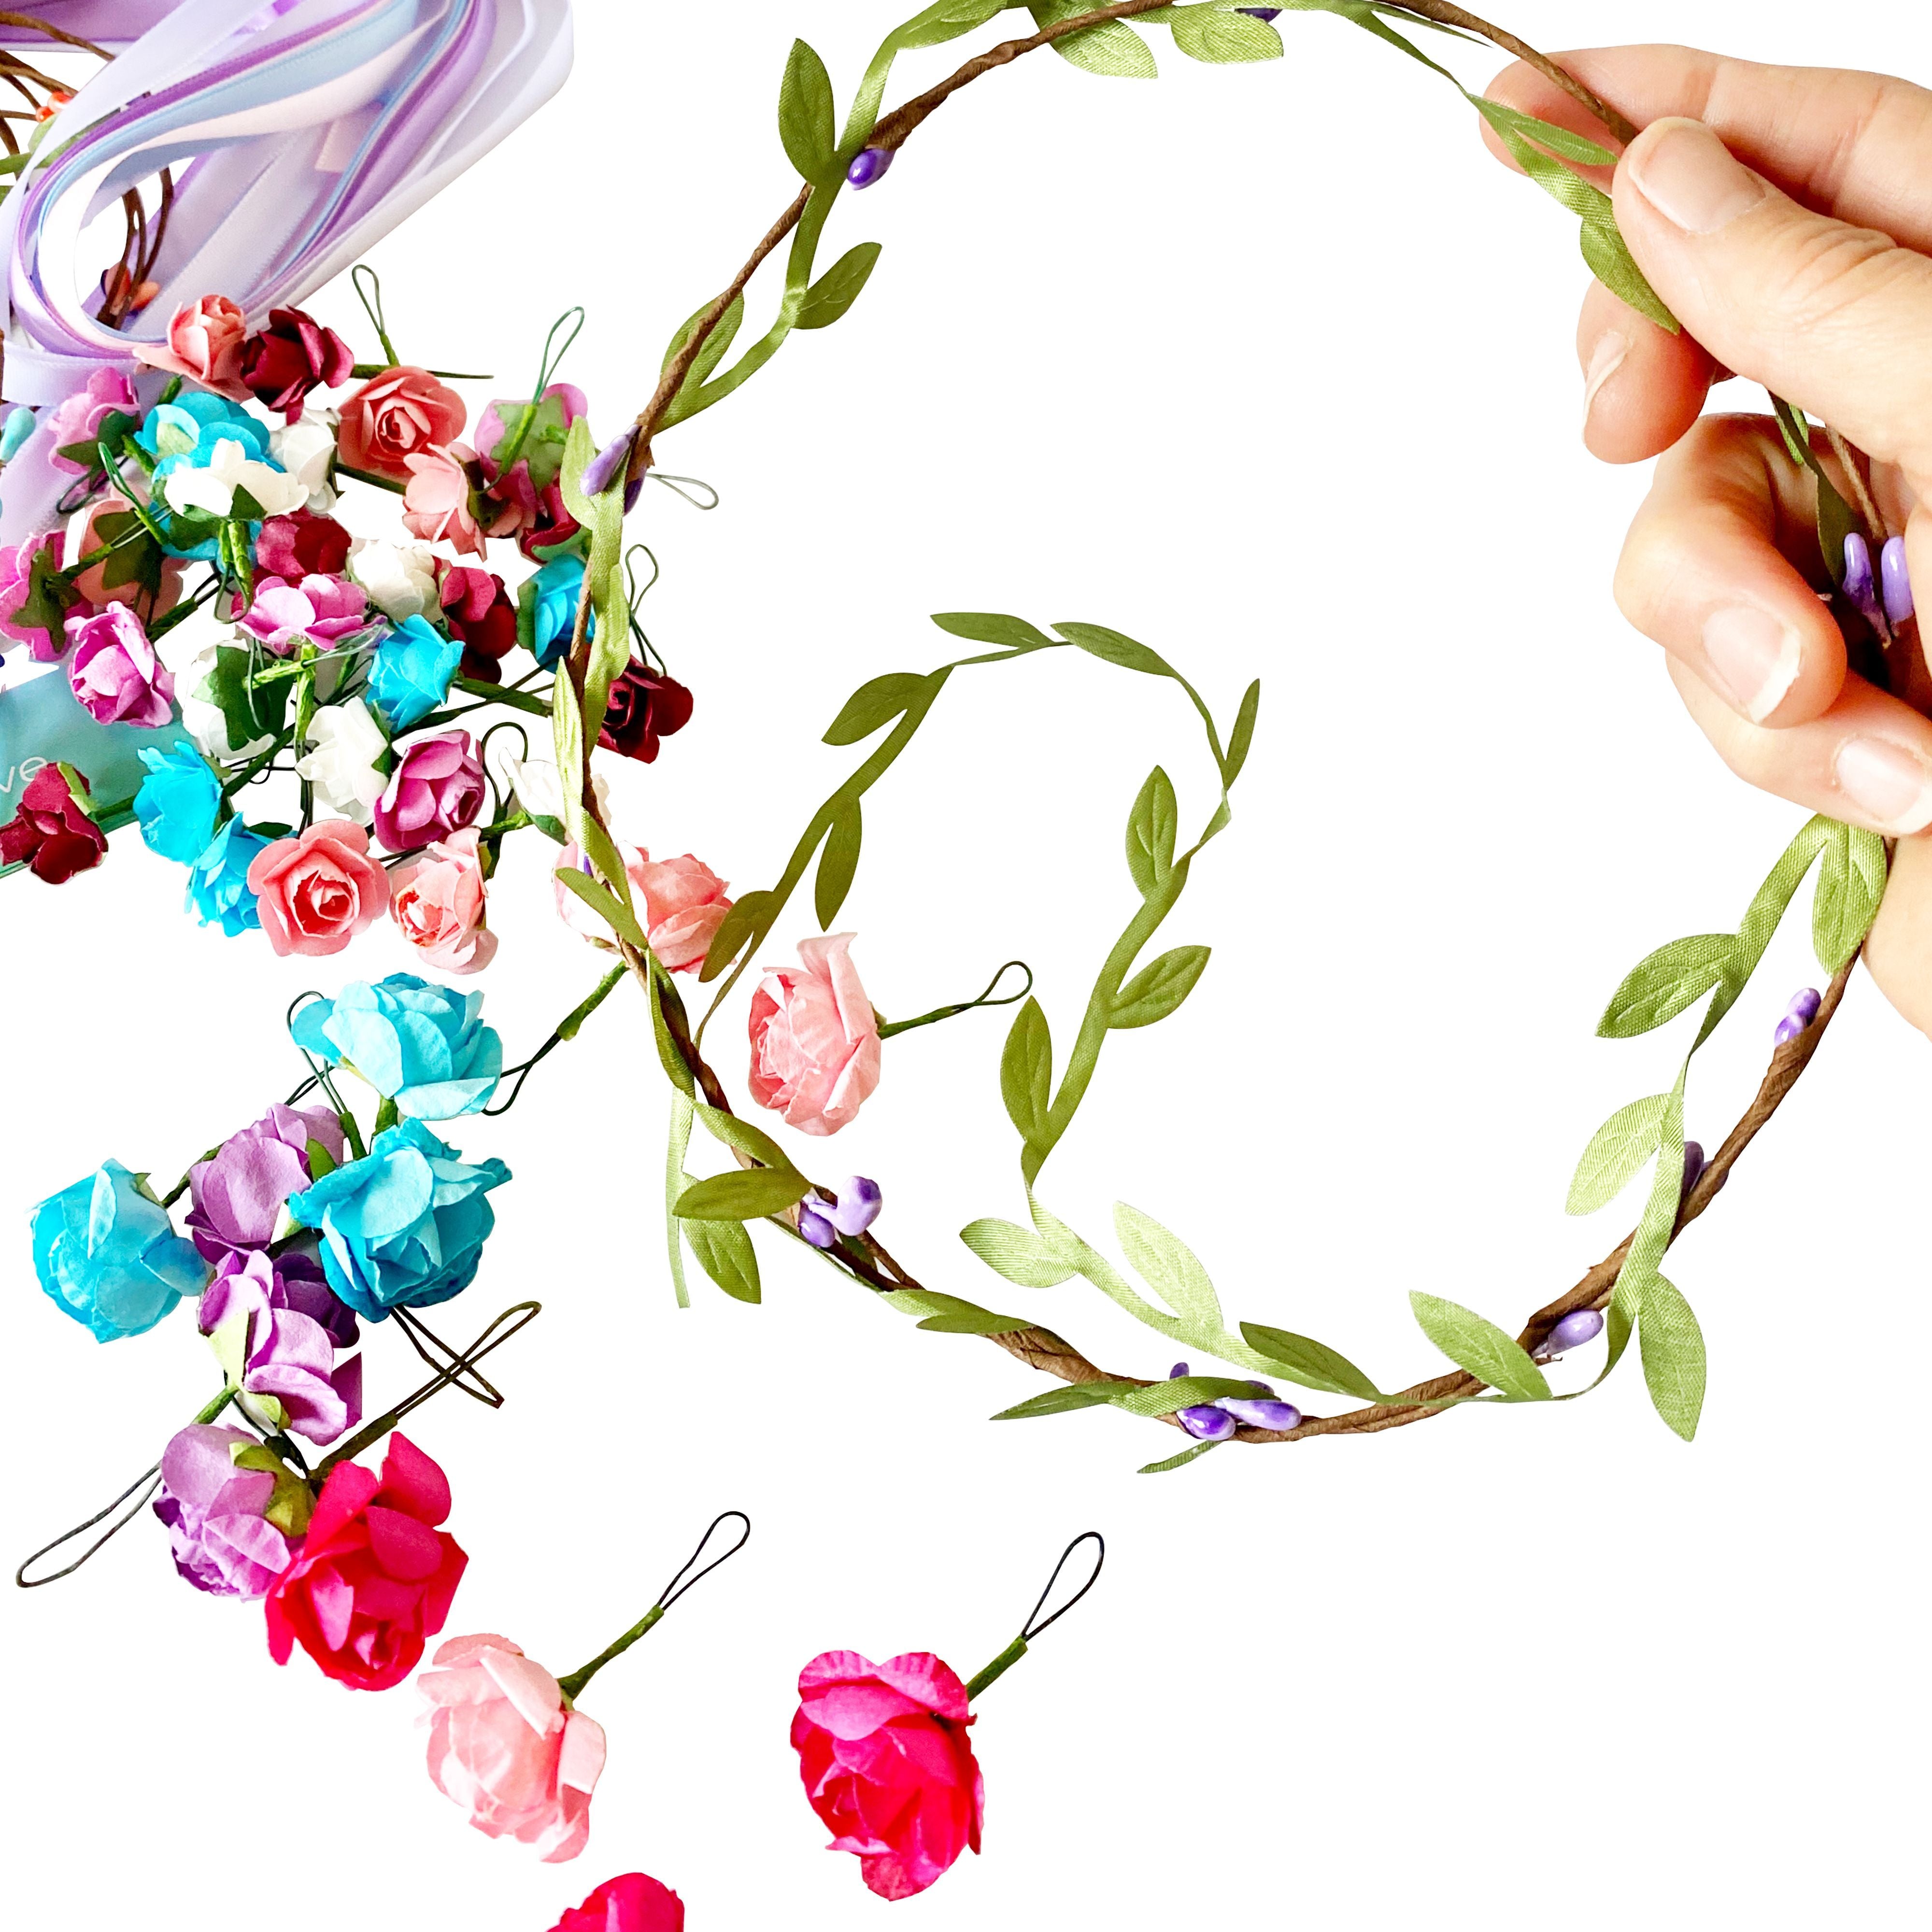 Make Your Own Flower Crown Headbands and Bracelets